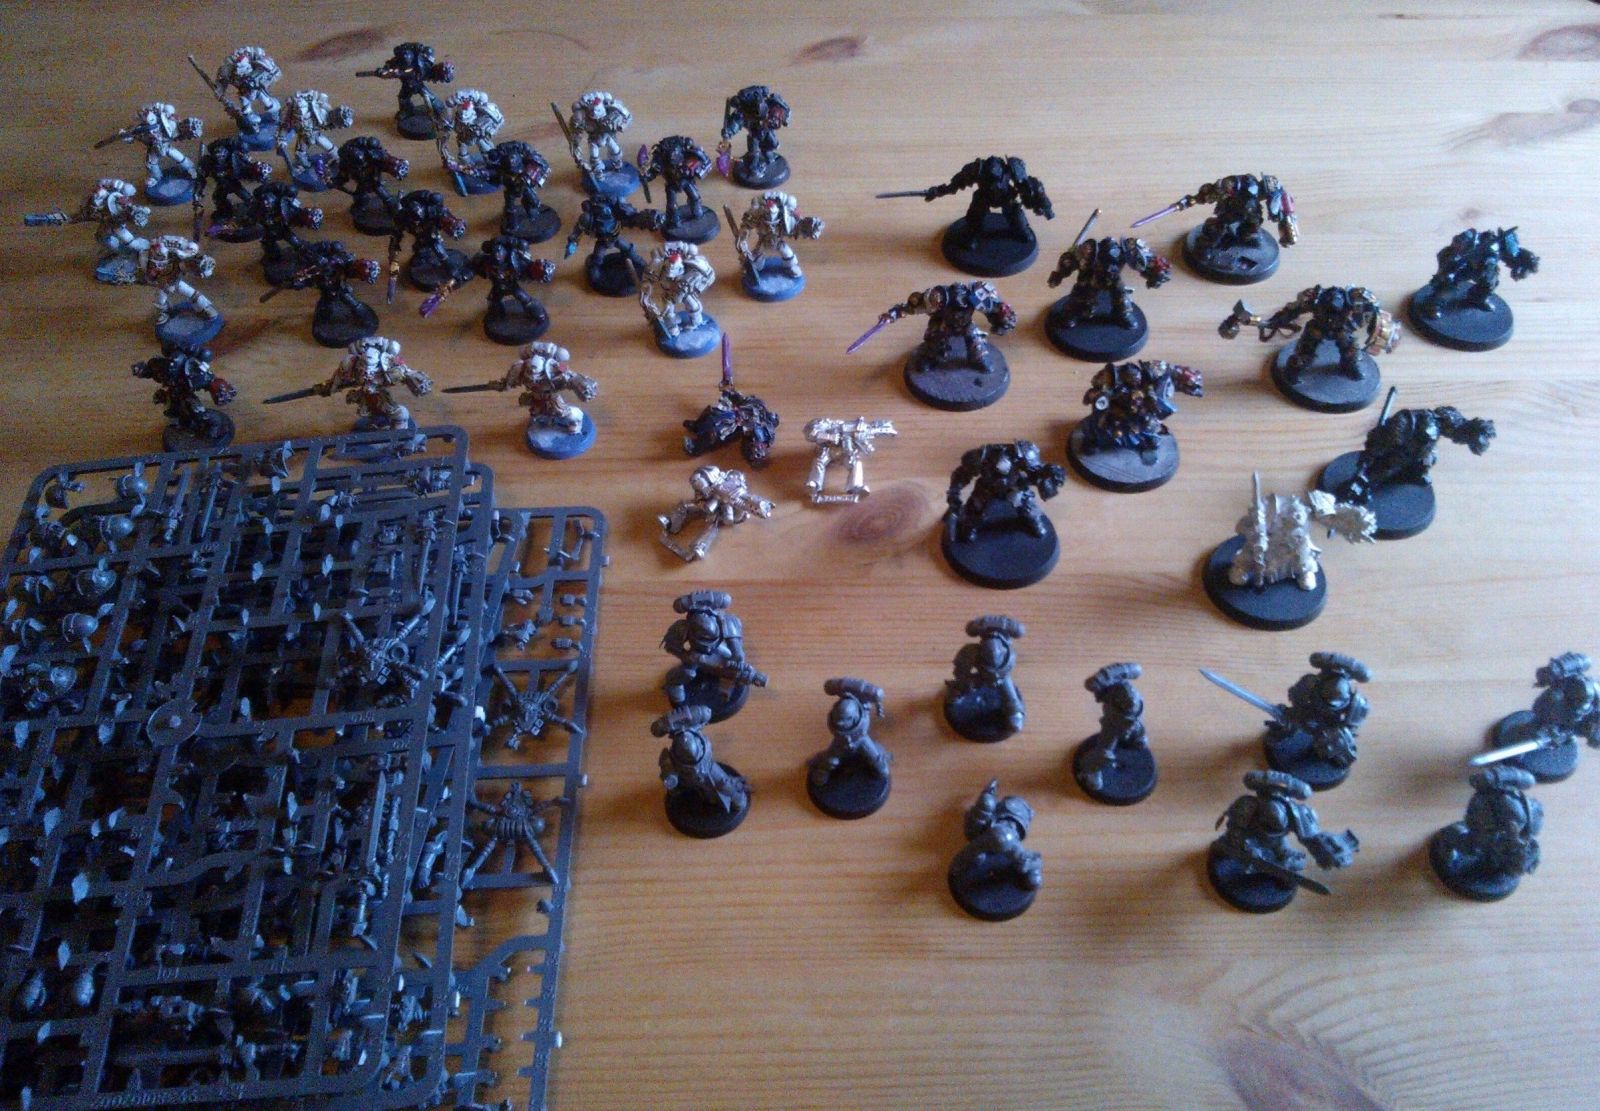 Grey Knights project